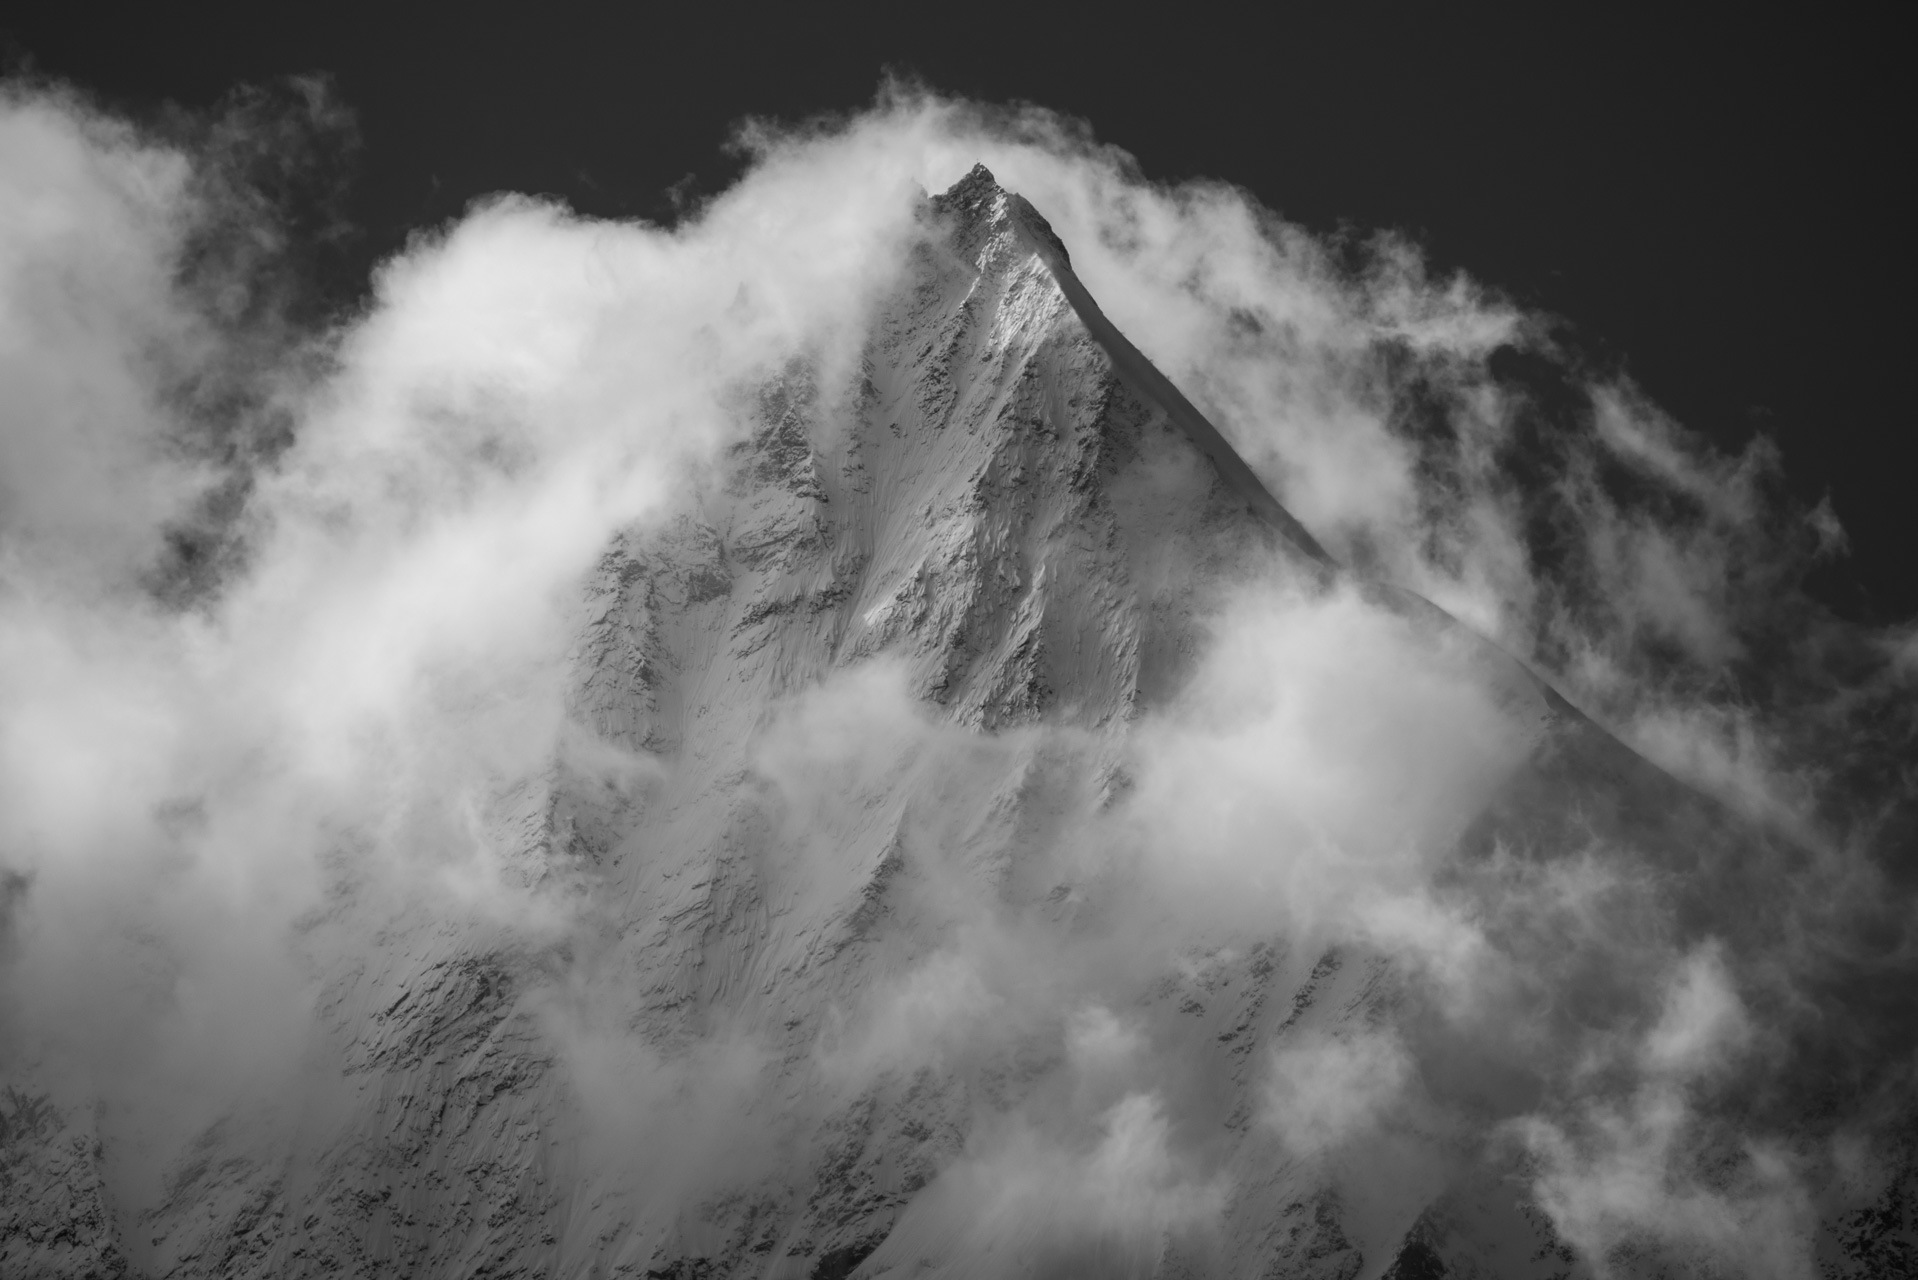 Weisshorn picture - Mountains photo and images - Zermatt